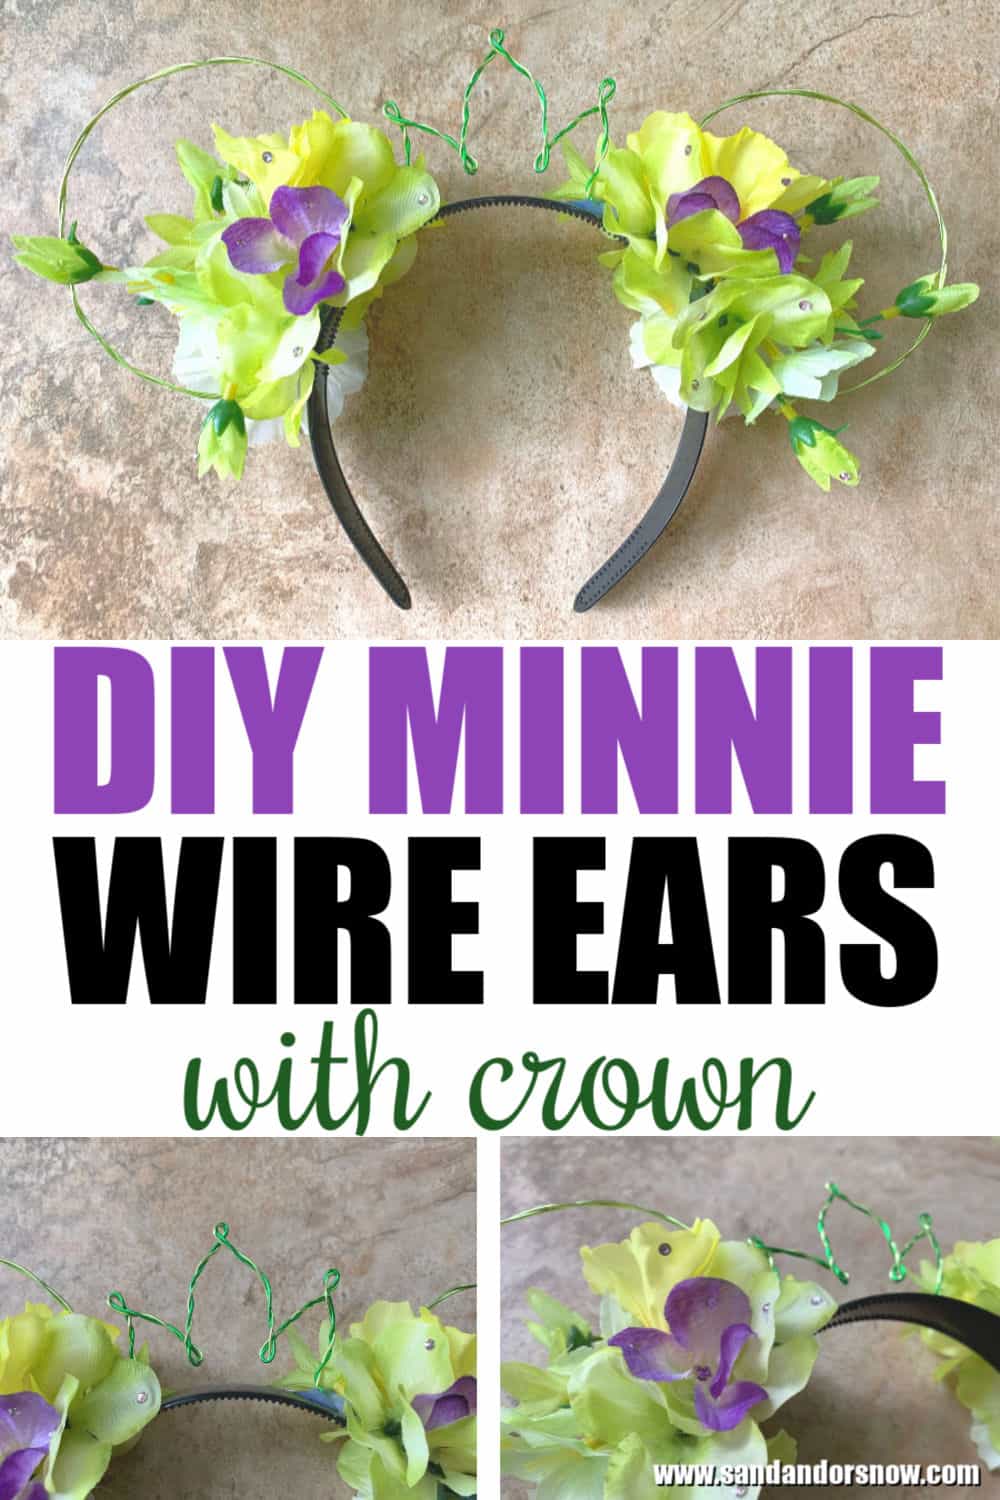 Ready for an easy DIY Mickey ear with crown tutorial? From where to get supplies to a step-by-step guide, here's my easy way to make Disney wire ear headbands with flowers and a wire crown! #Disney #DisneyCrafts #DisneyDIY #EarHeadbands #MinnieEars #MickeyEars #PrincessEars